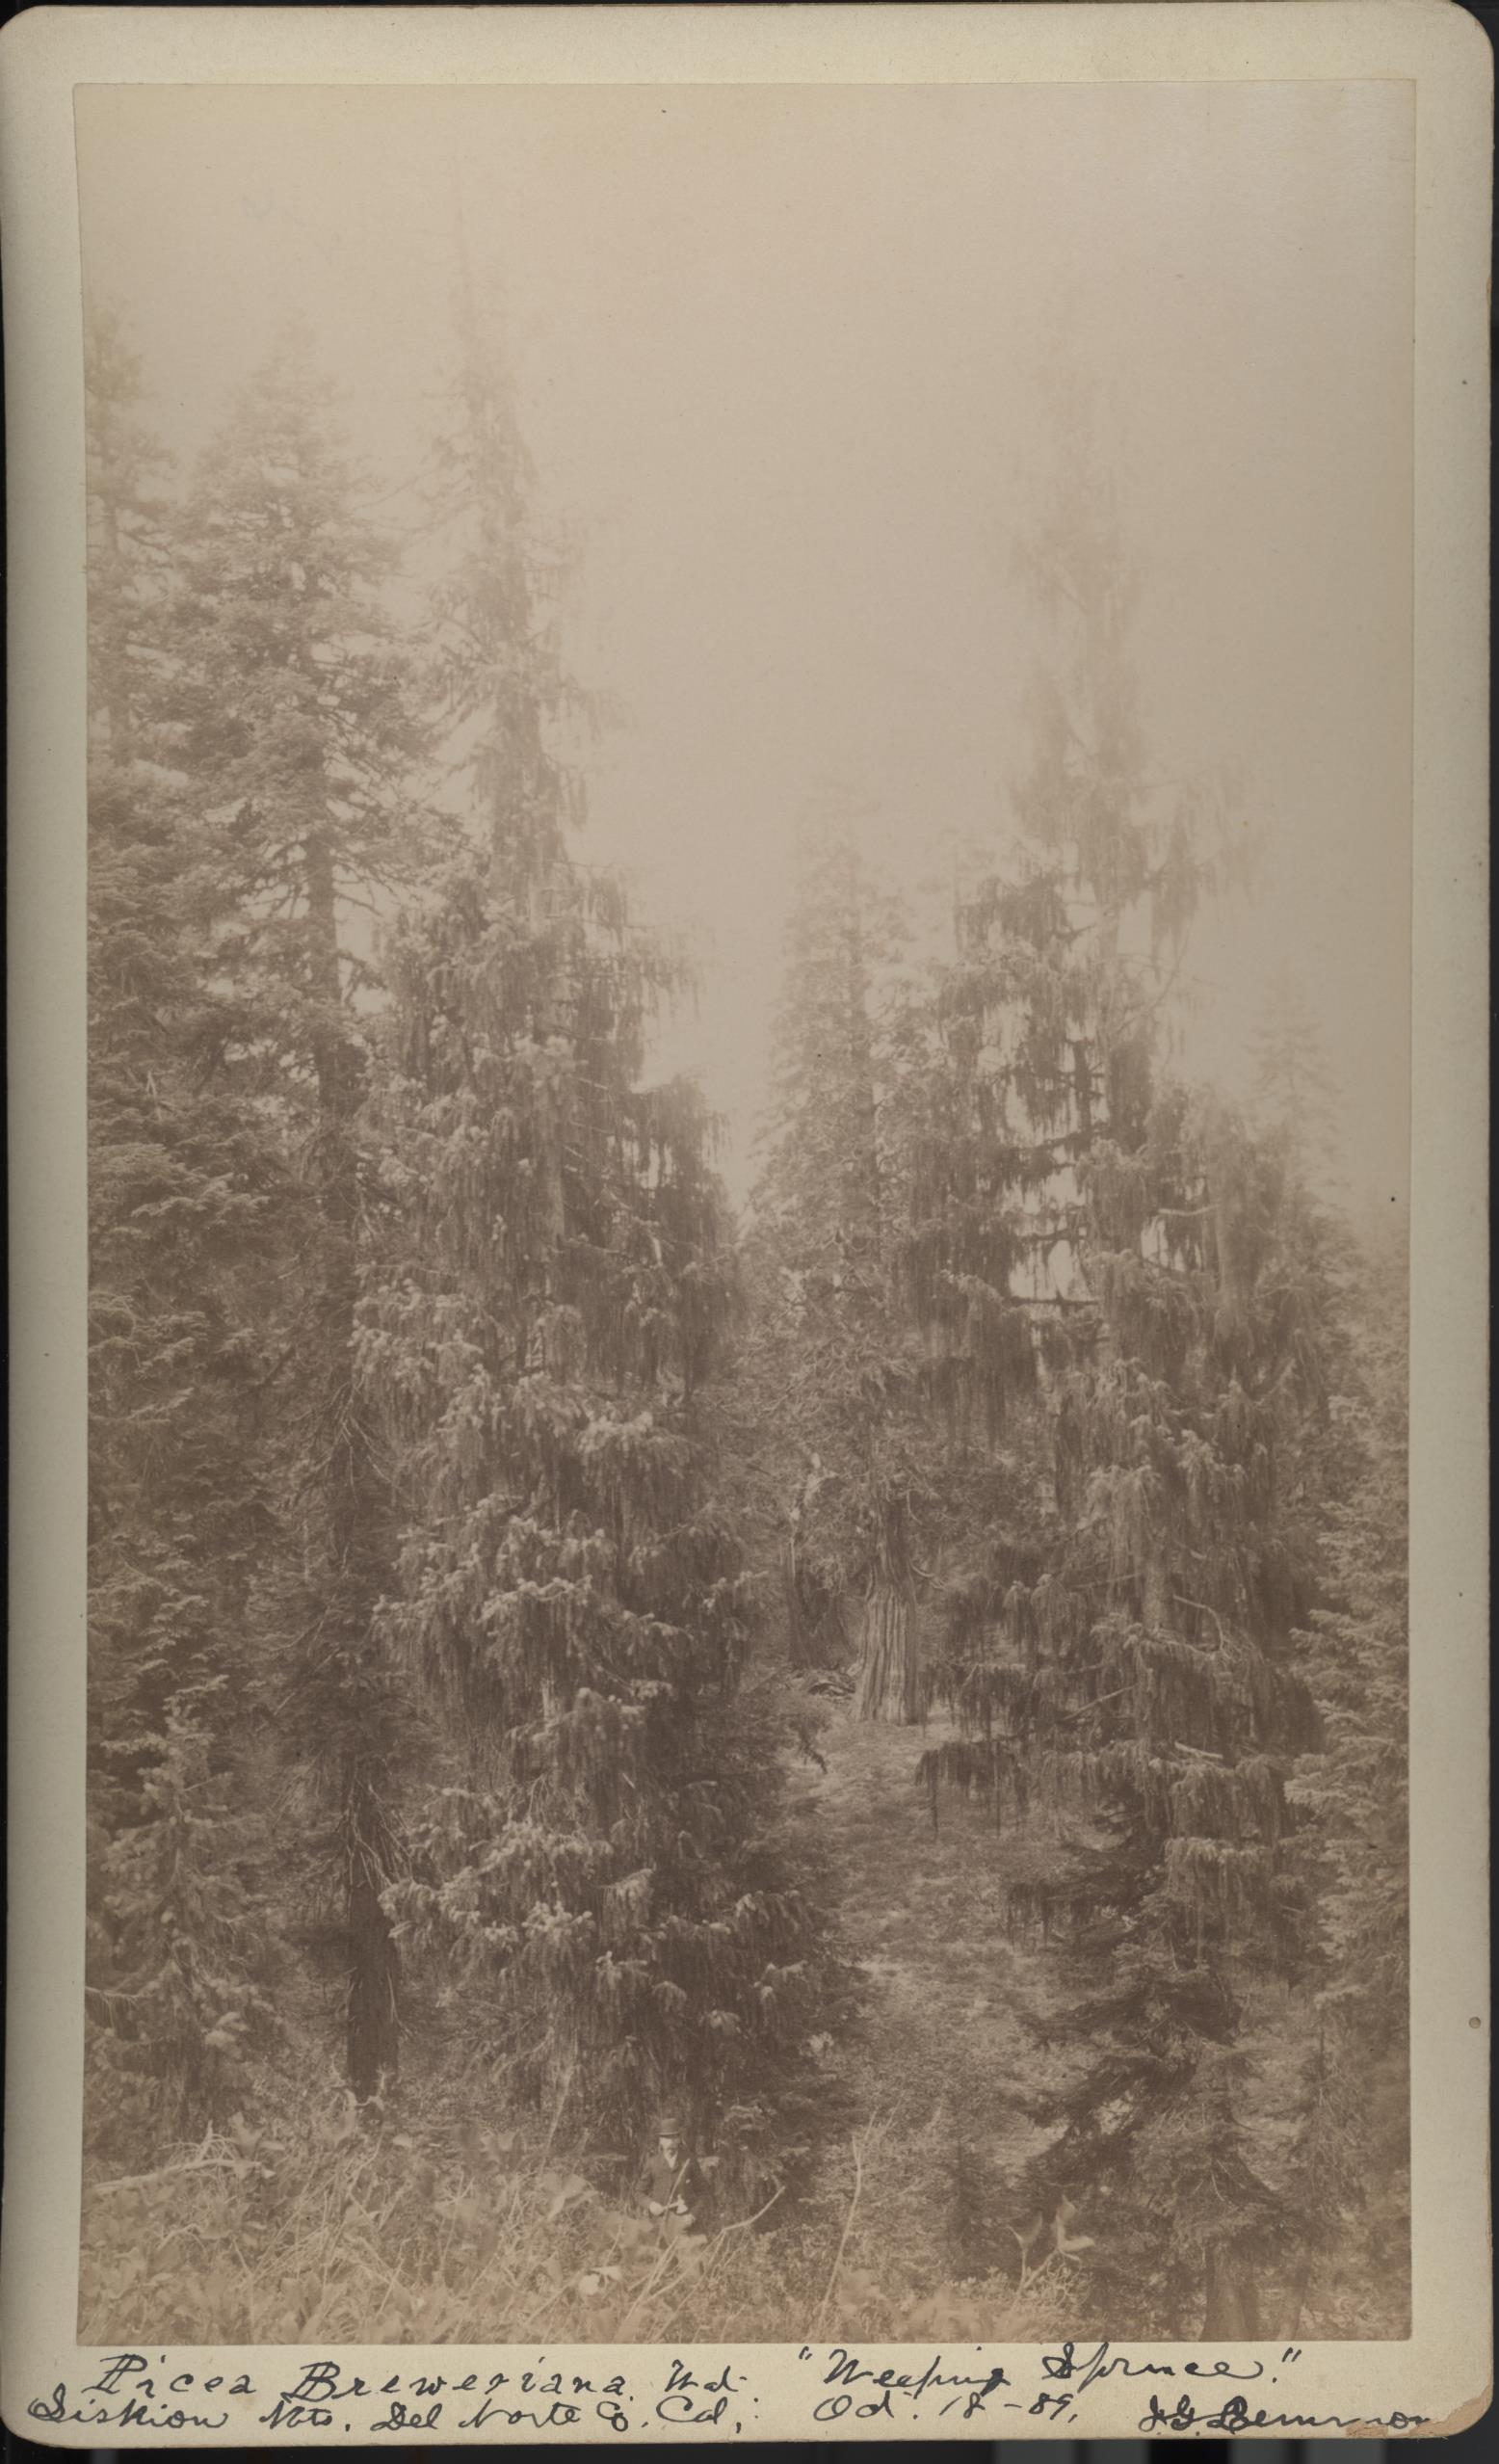 A sepia photograph on a 5.25"x8.5" piece of cardstock depicting Weeping Spruce trees in a forested area. Photographed by J.G. Lemmon.